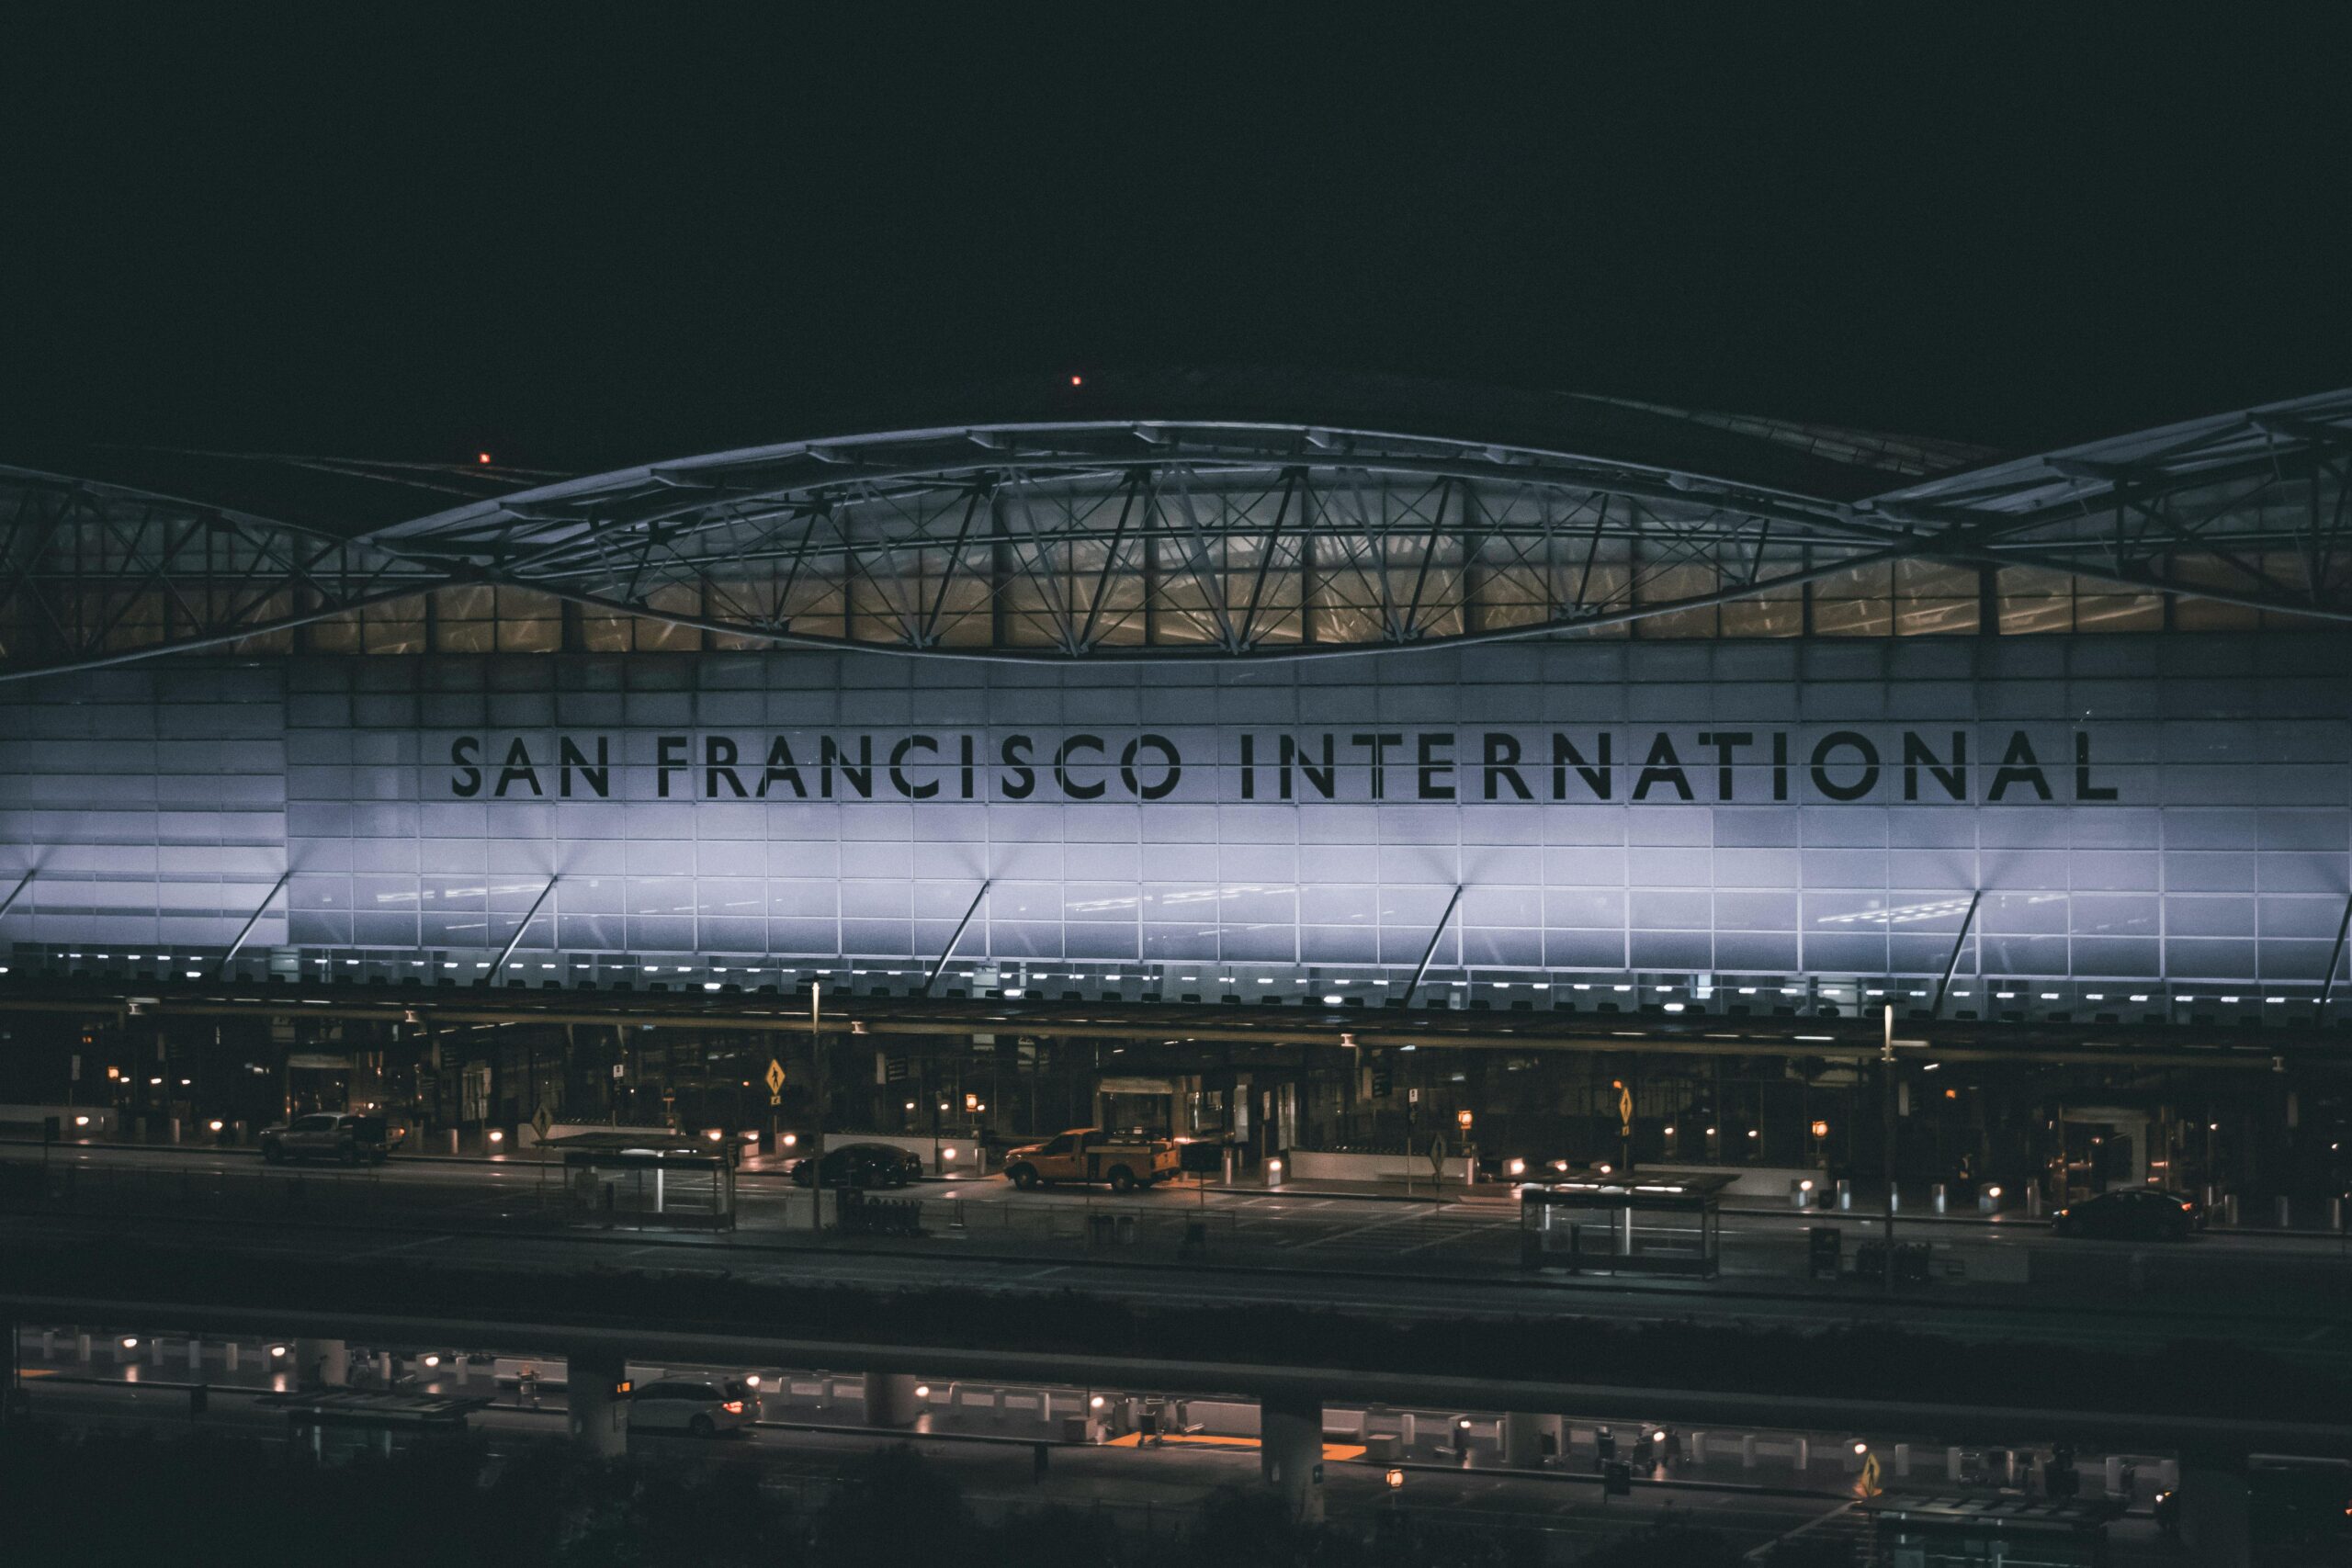 San Francisco International Airport, San Francisco Bay Oakland International Airport, US airports fight over the right to use the name “San Francisco”